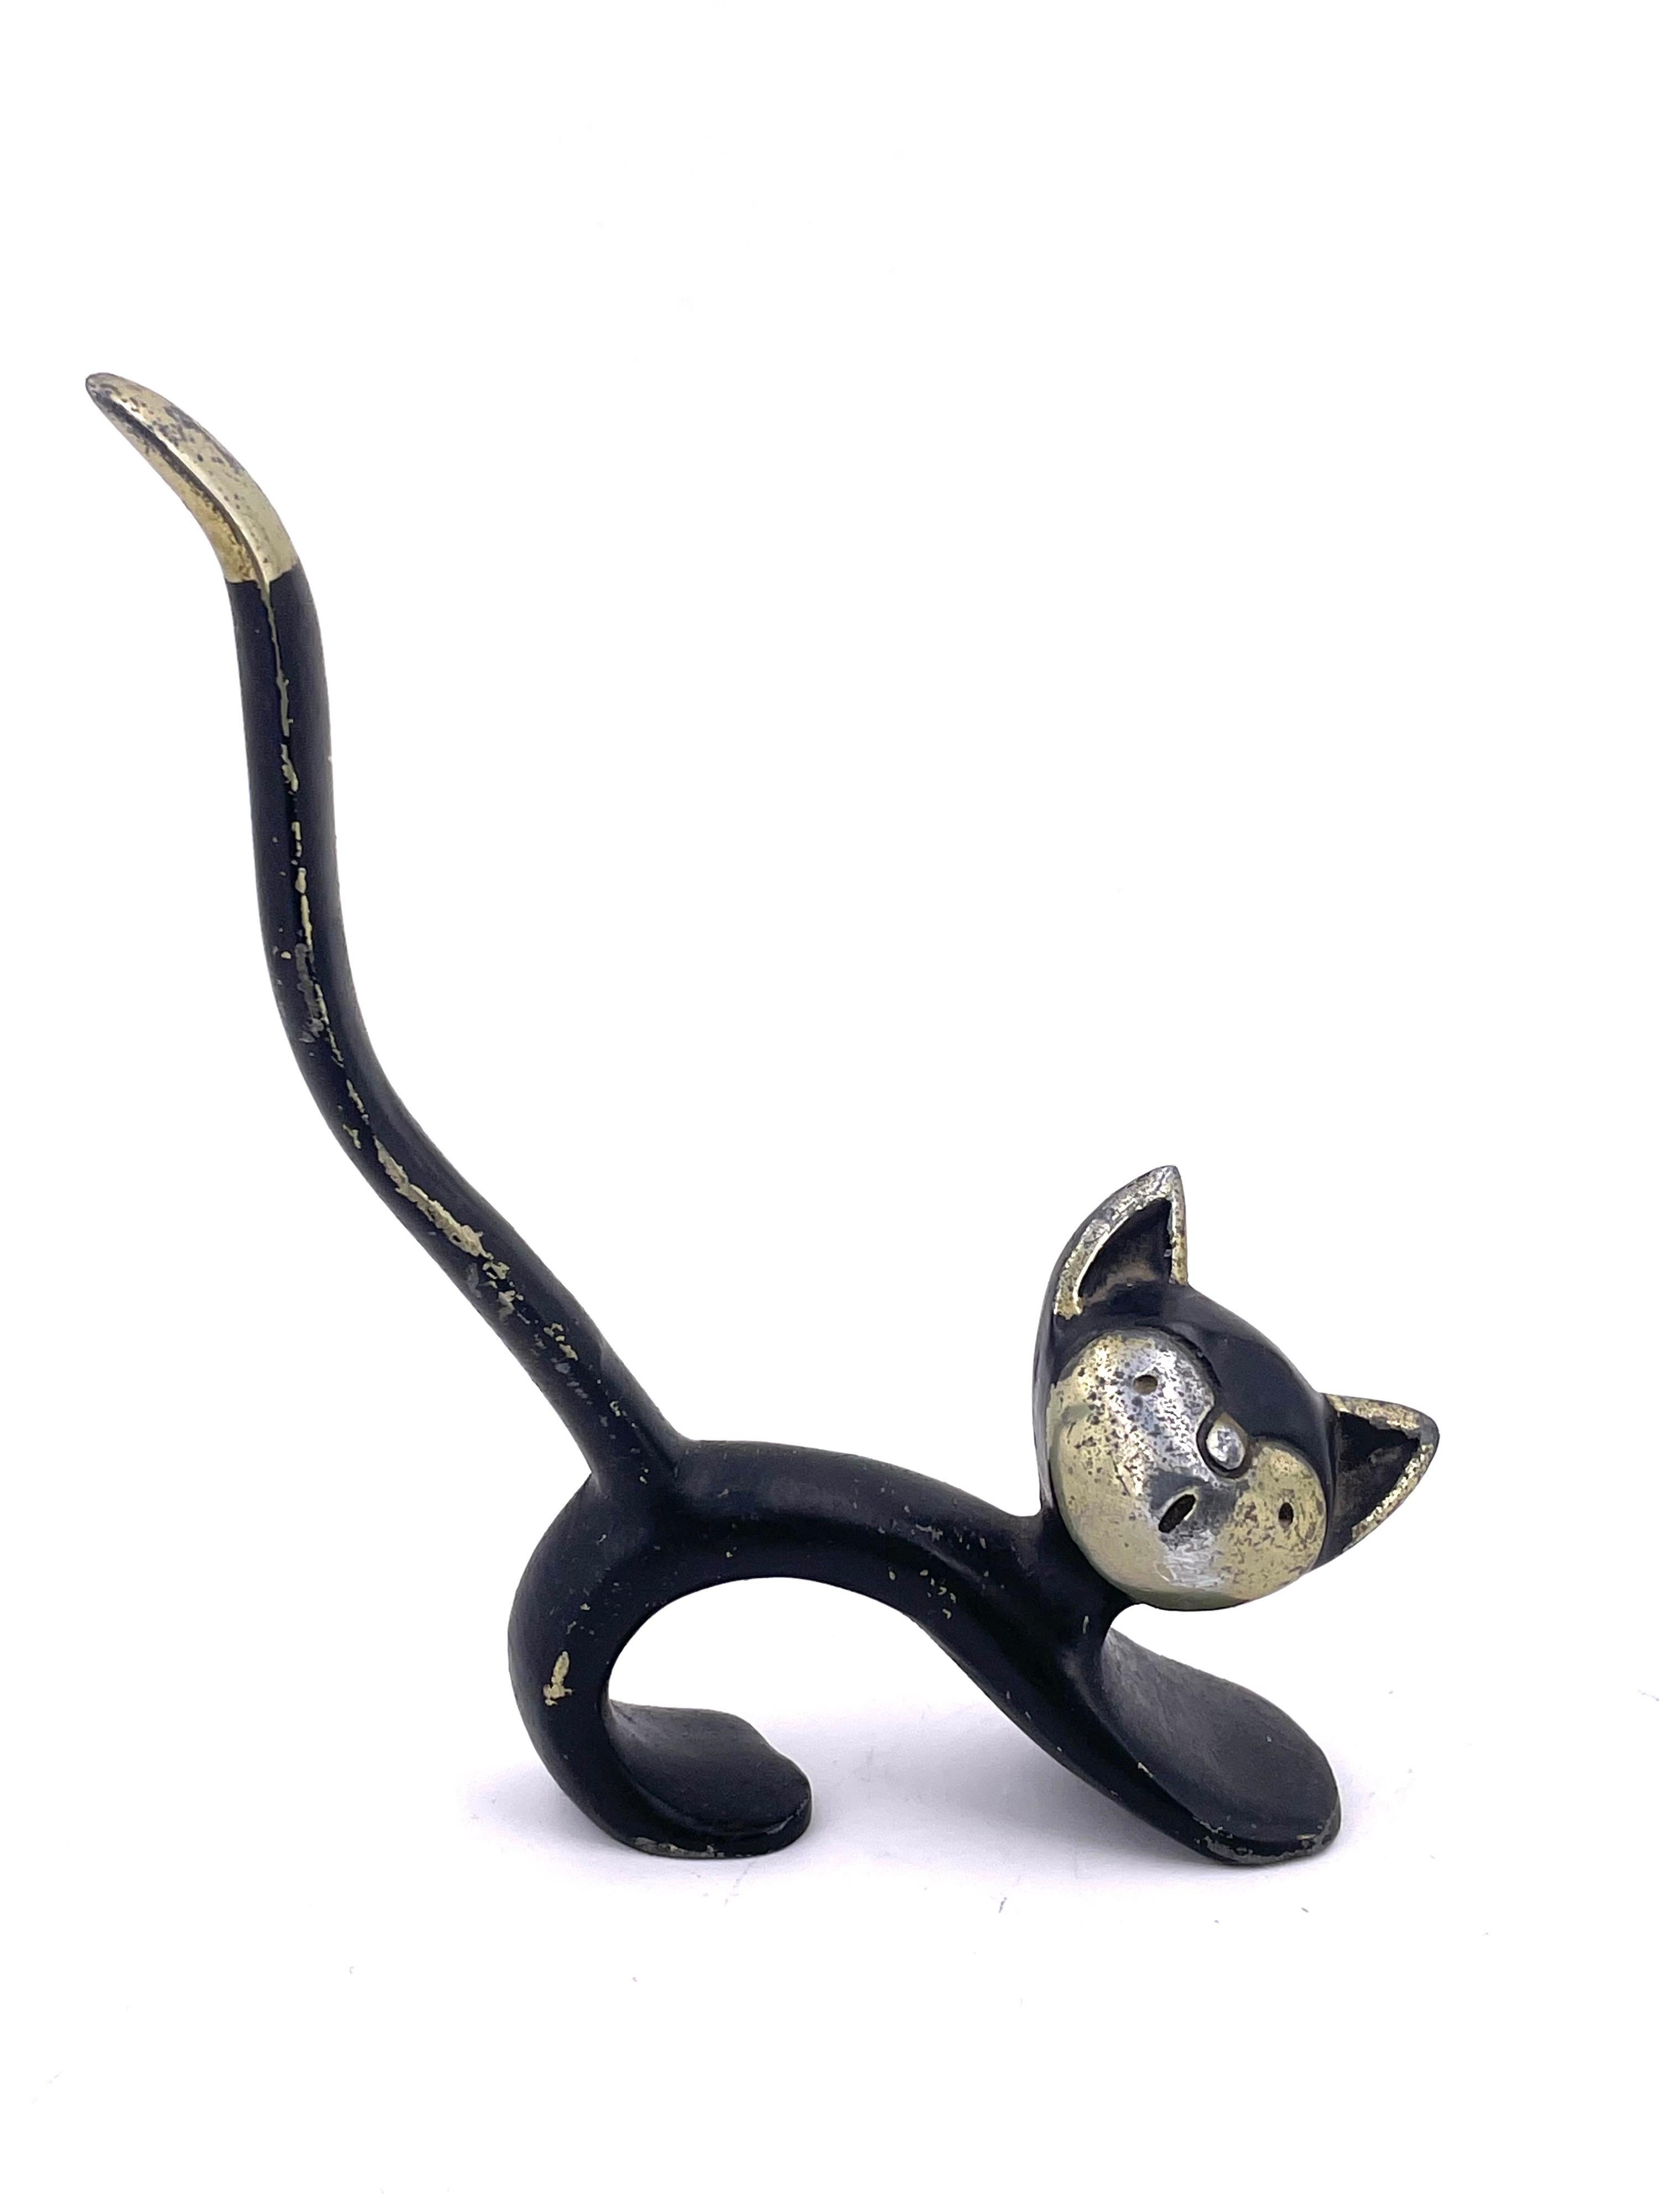 Rare Walter Bosse cat ring holder circa 1950's nicely patinated, some brass left from the original finish some scratches and painting it's off as shown.